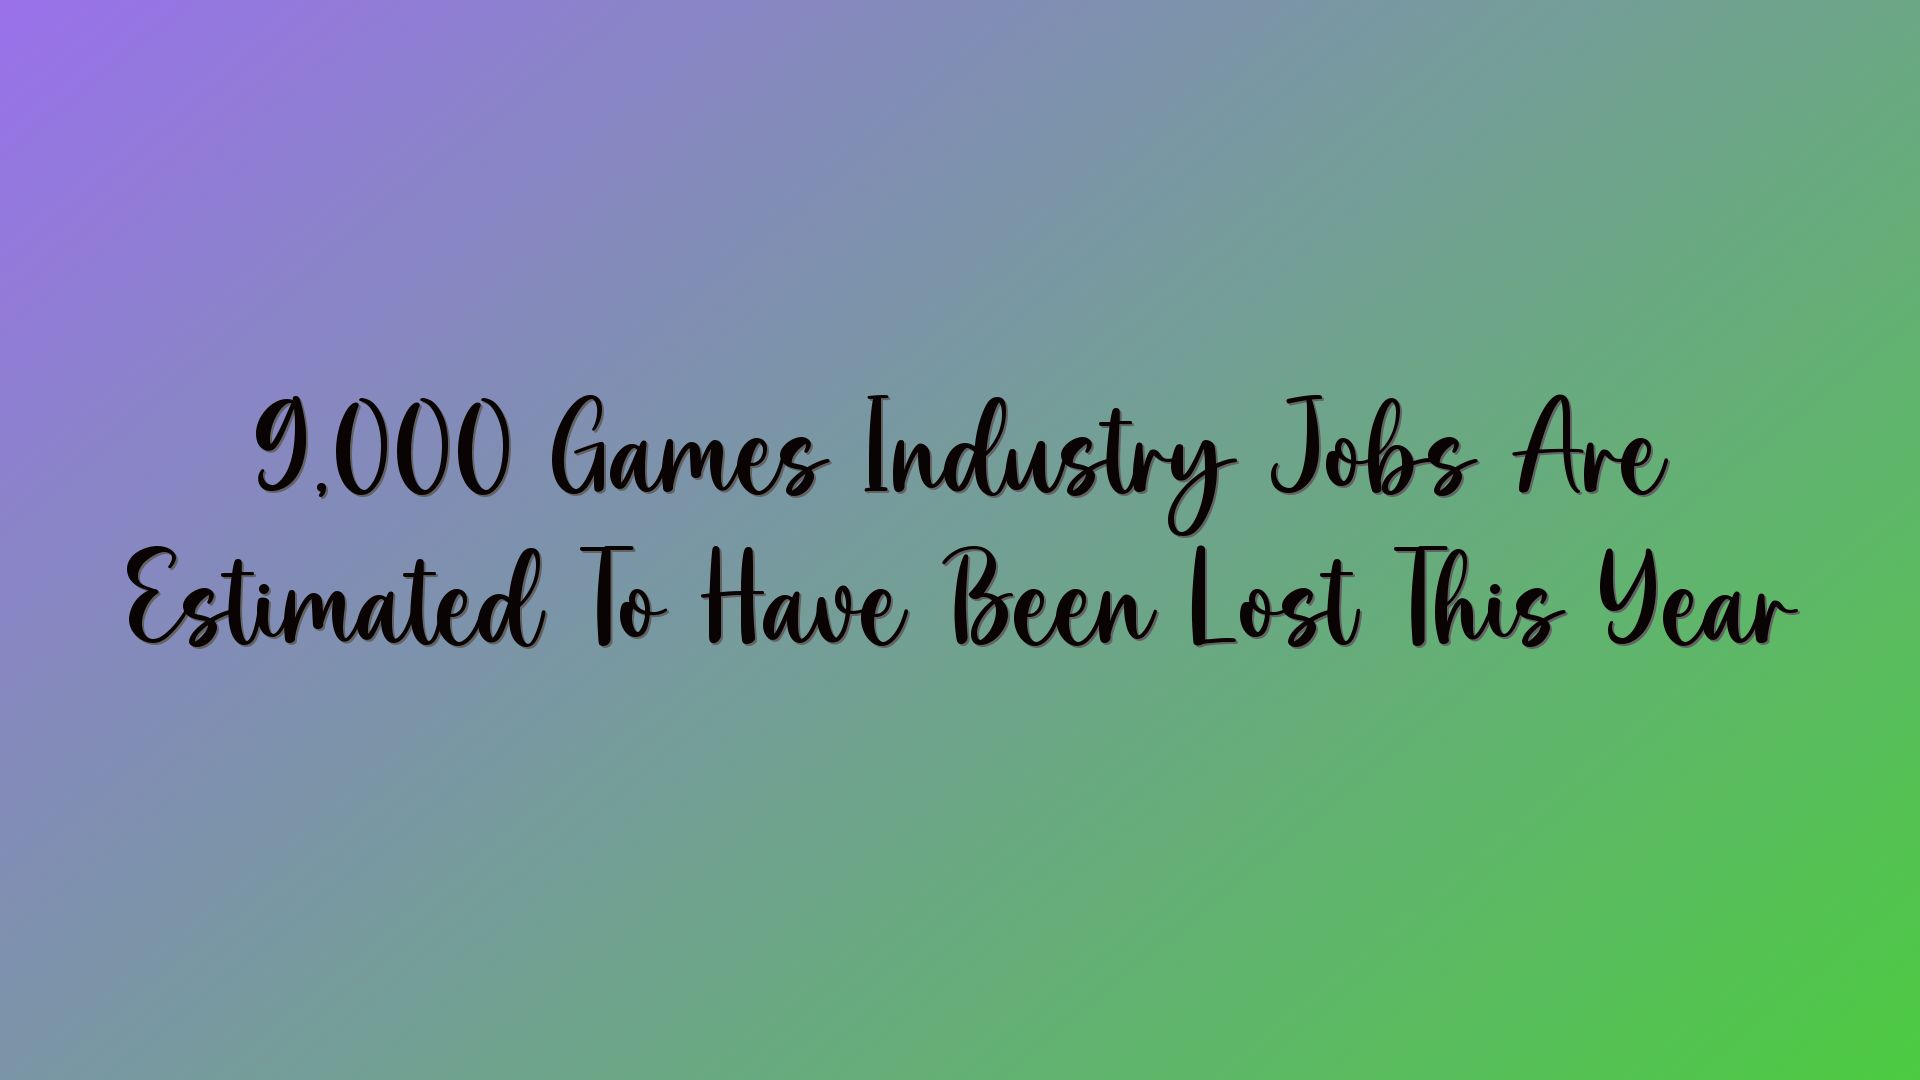 9,000 Games Industry Jobs Are Estimated To Have Been Lost This Year